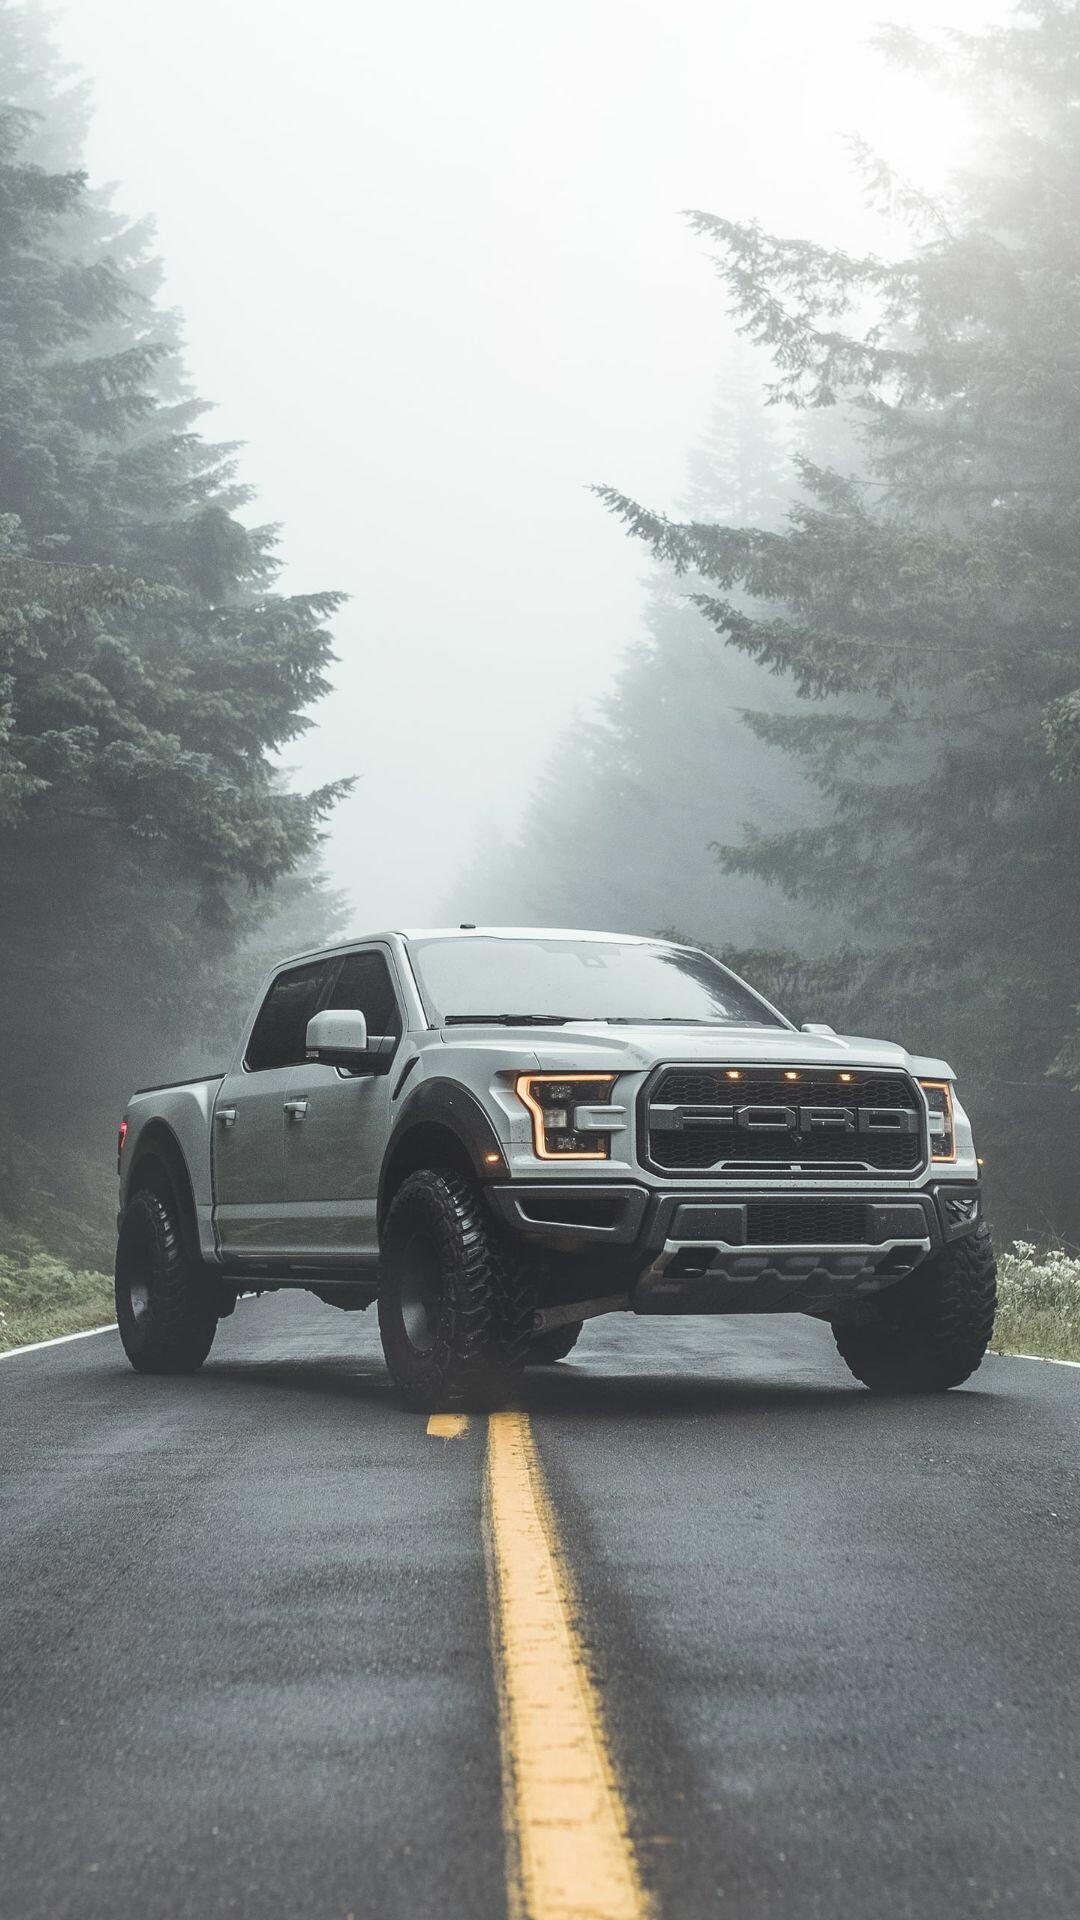 Ford: One of the oldest American automobile manufacturers, Raptor. 1080x1920 Full HD Background.